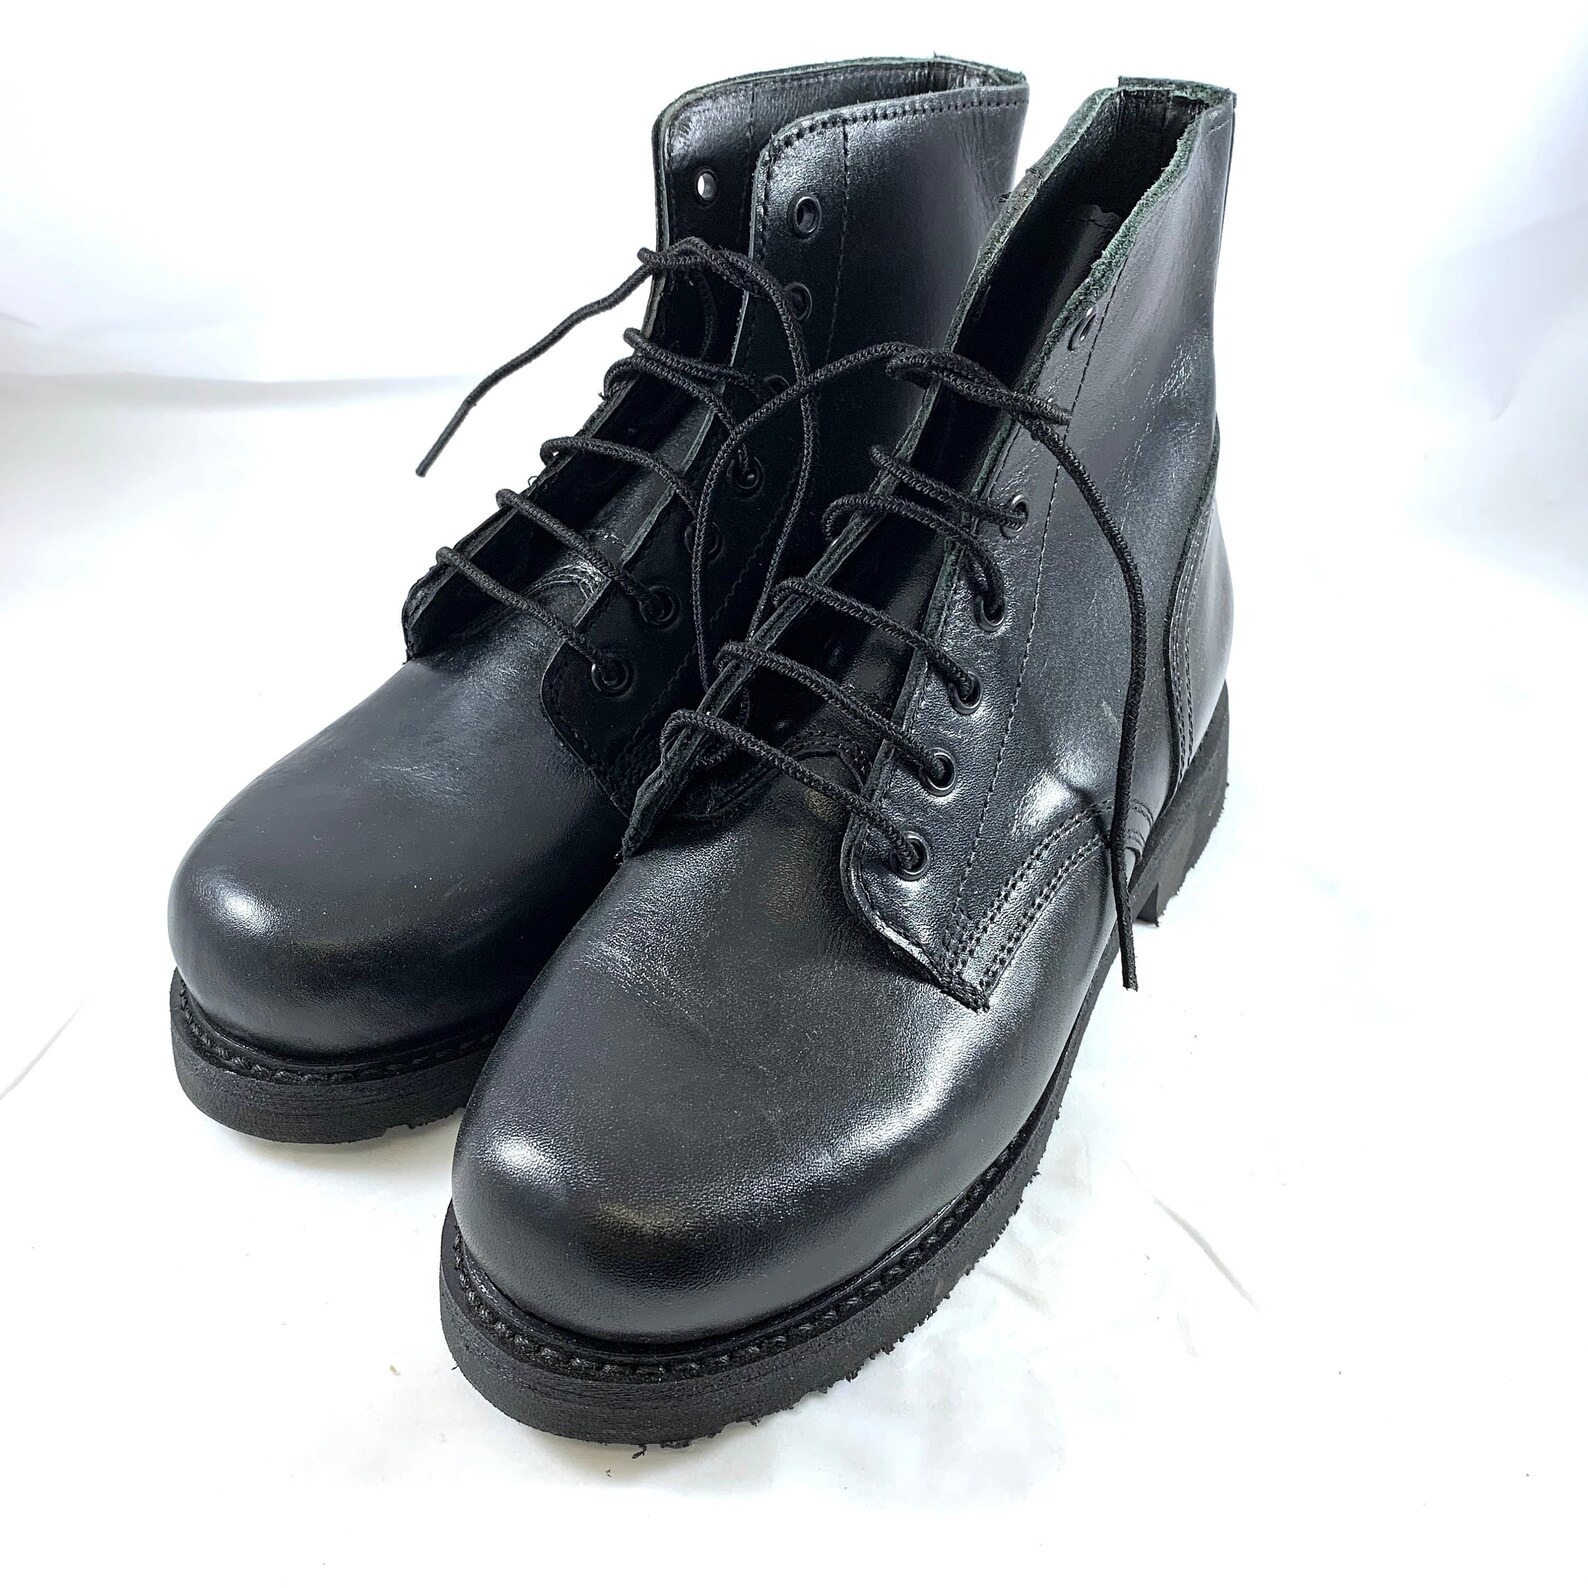 Black Leather Canadian Military Parade Combat Boots | Etsy